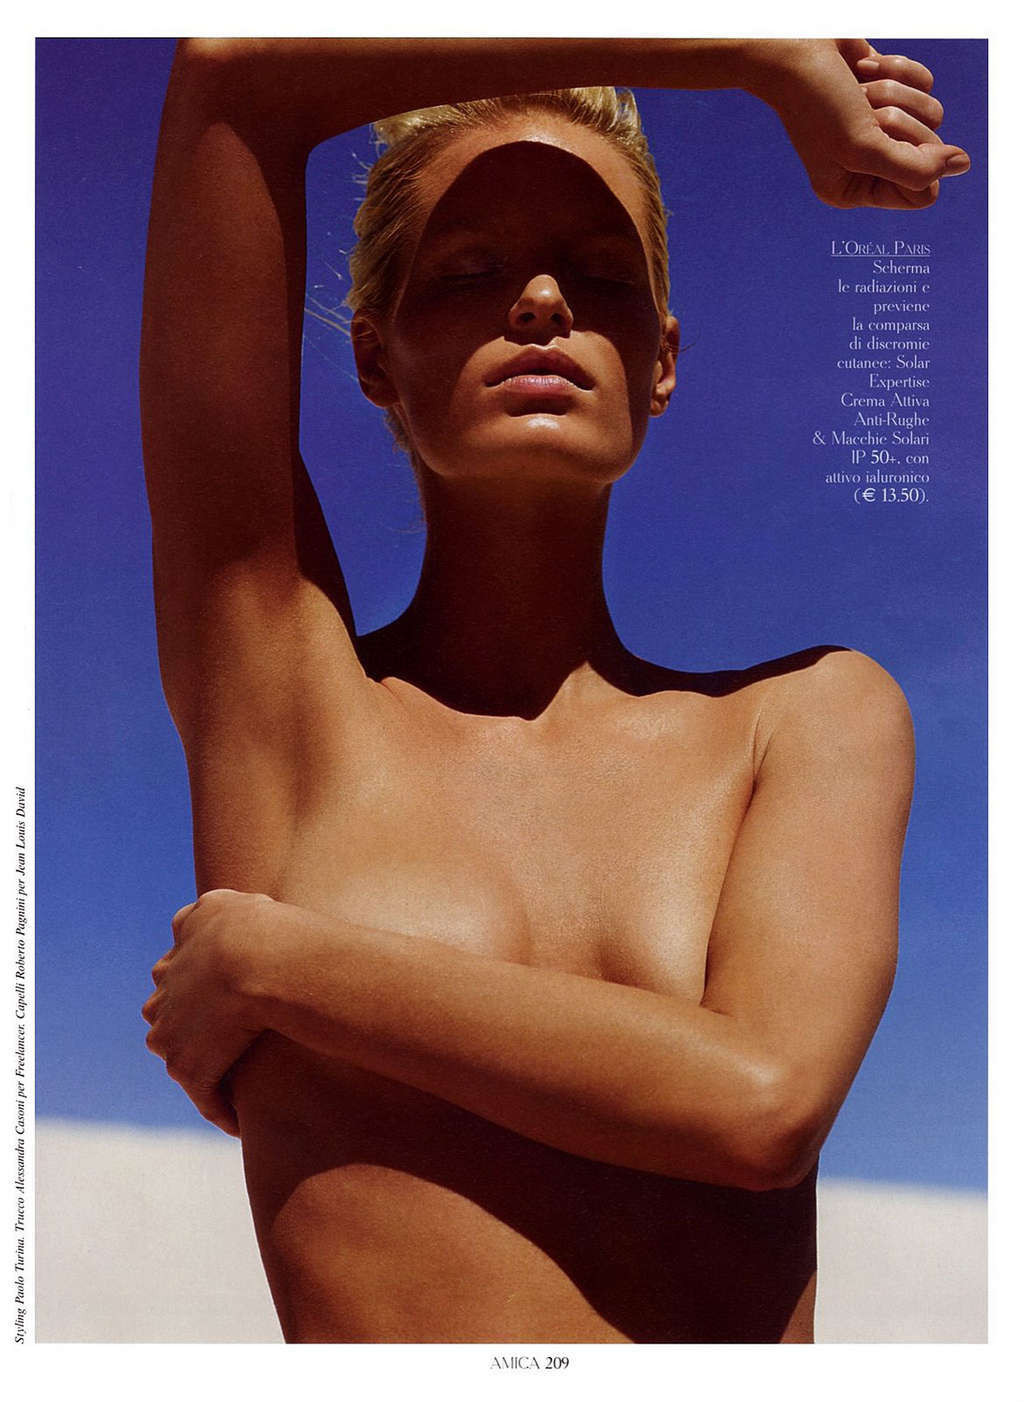 Caroline Winberg exposing her nice tits and posing nude for some magazine #75372921